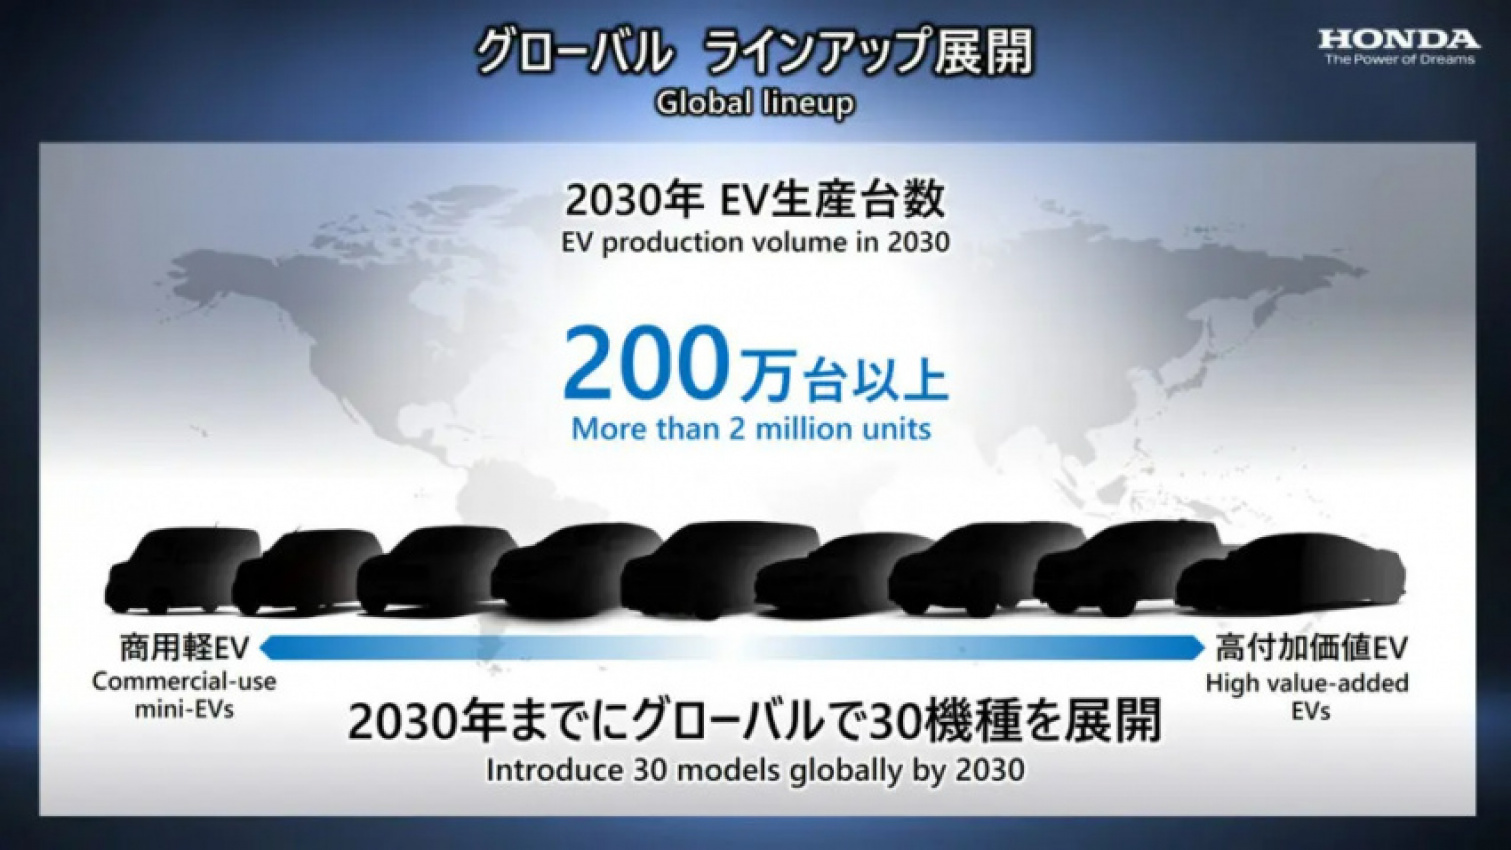 autos, cars, honda, automotive industry, car, cars, driven, driven nz, electric cars, honda to introduce 30 new evs by 2030, motoring, new zealand, news, nz, sportscar, ute, honda to introduce 30 new evs by 2030